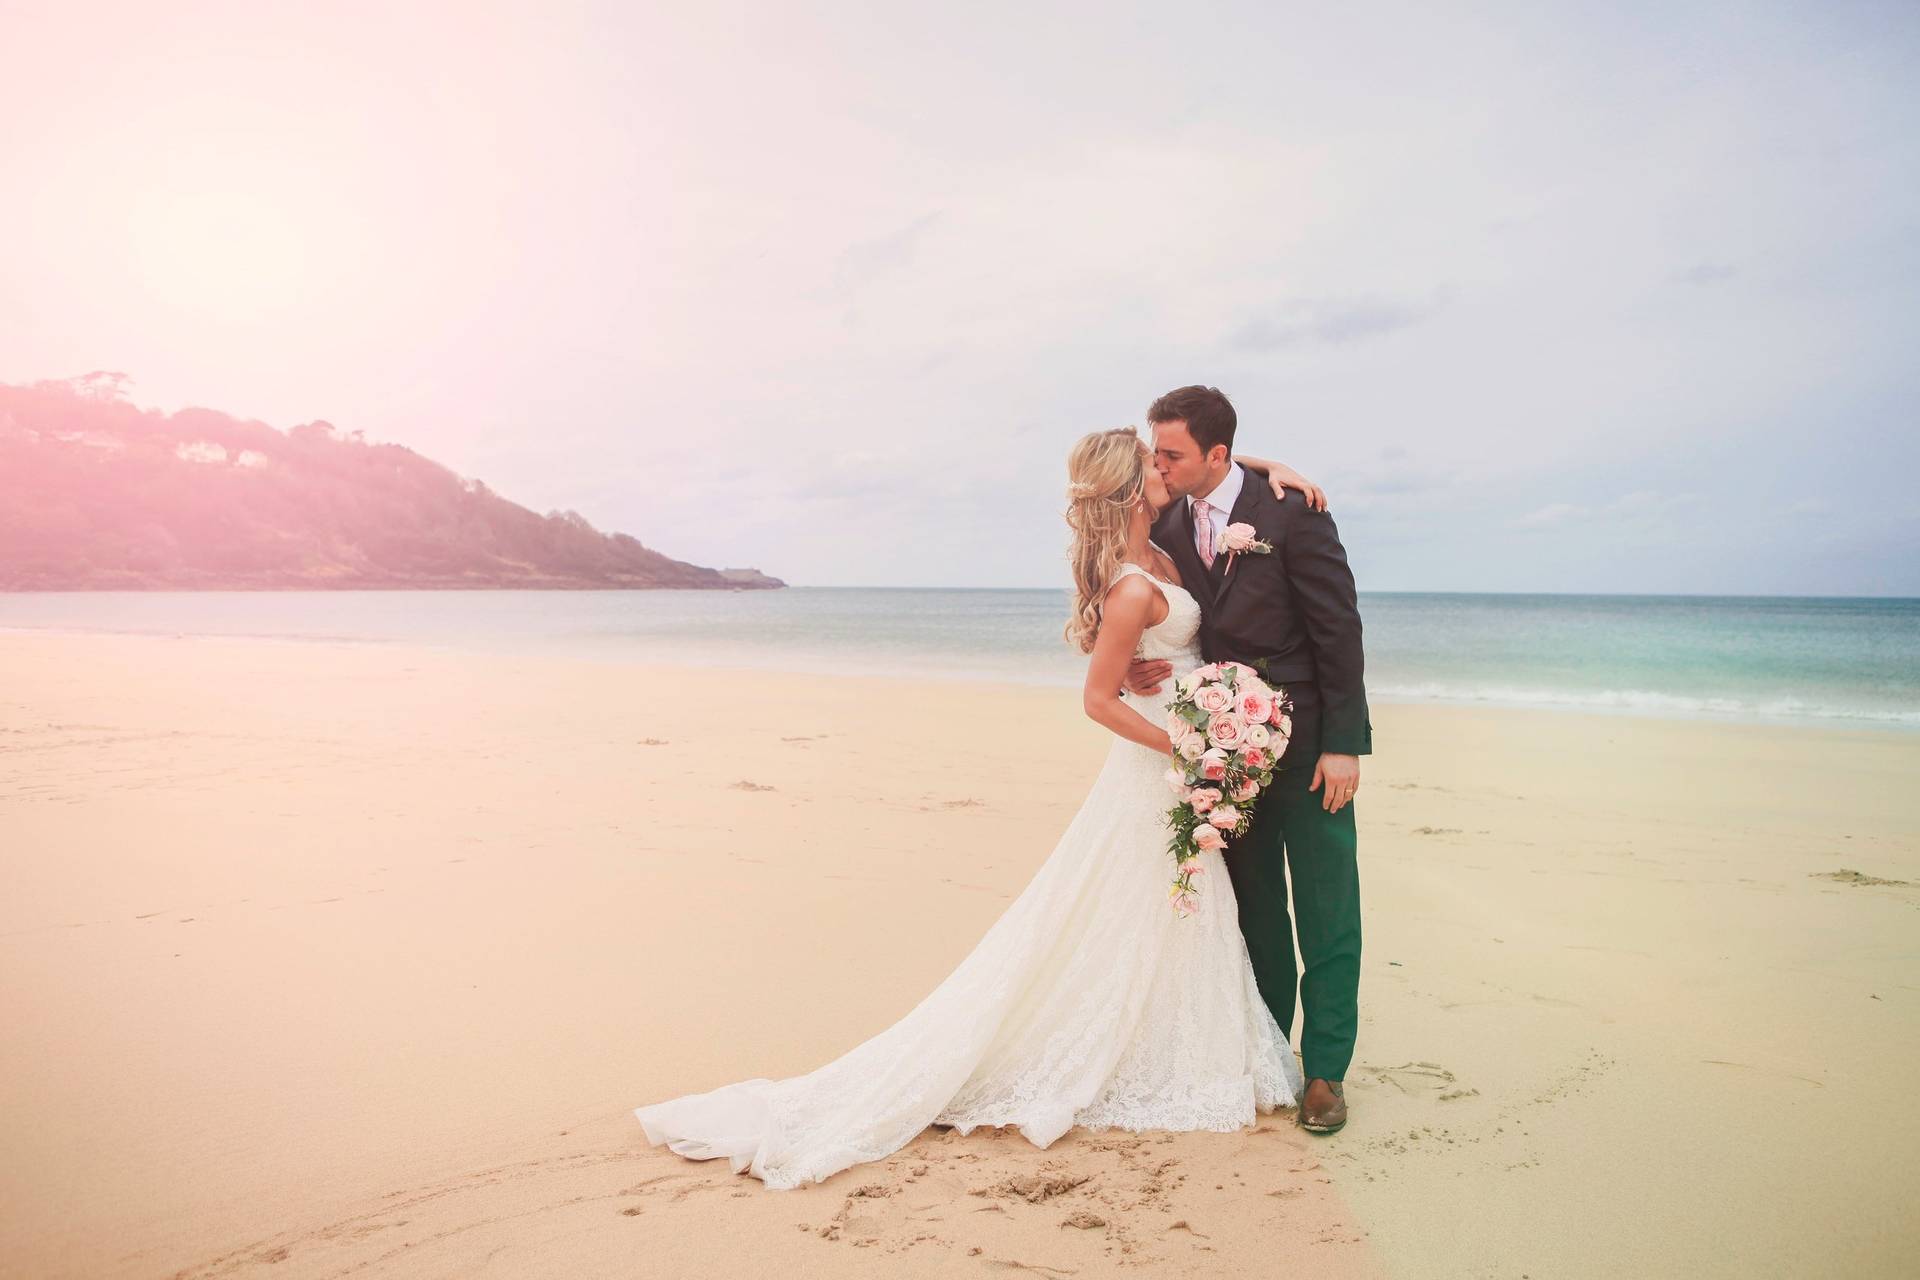 Carbis Bay Hotel Wedding Venue St. Ives, Cornwall | hitched.co.uk